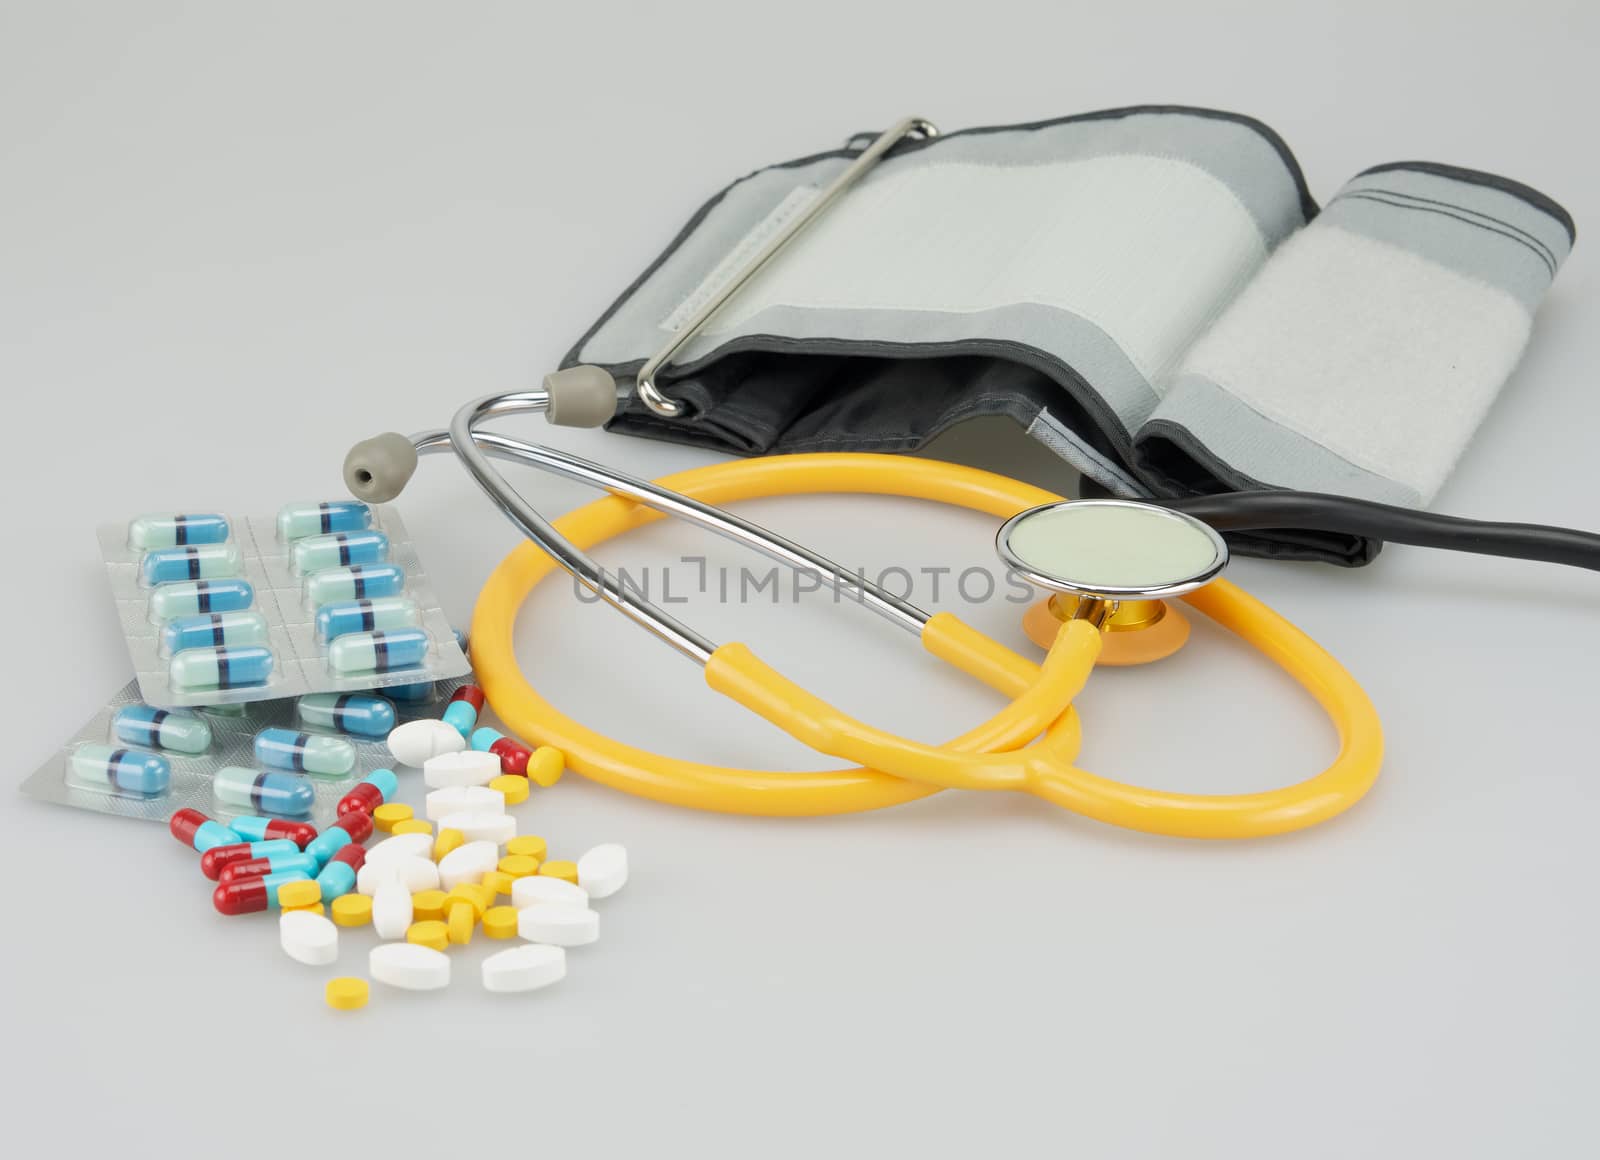 Lot of medicine with blood pressure equipment placed on white background.